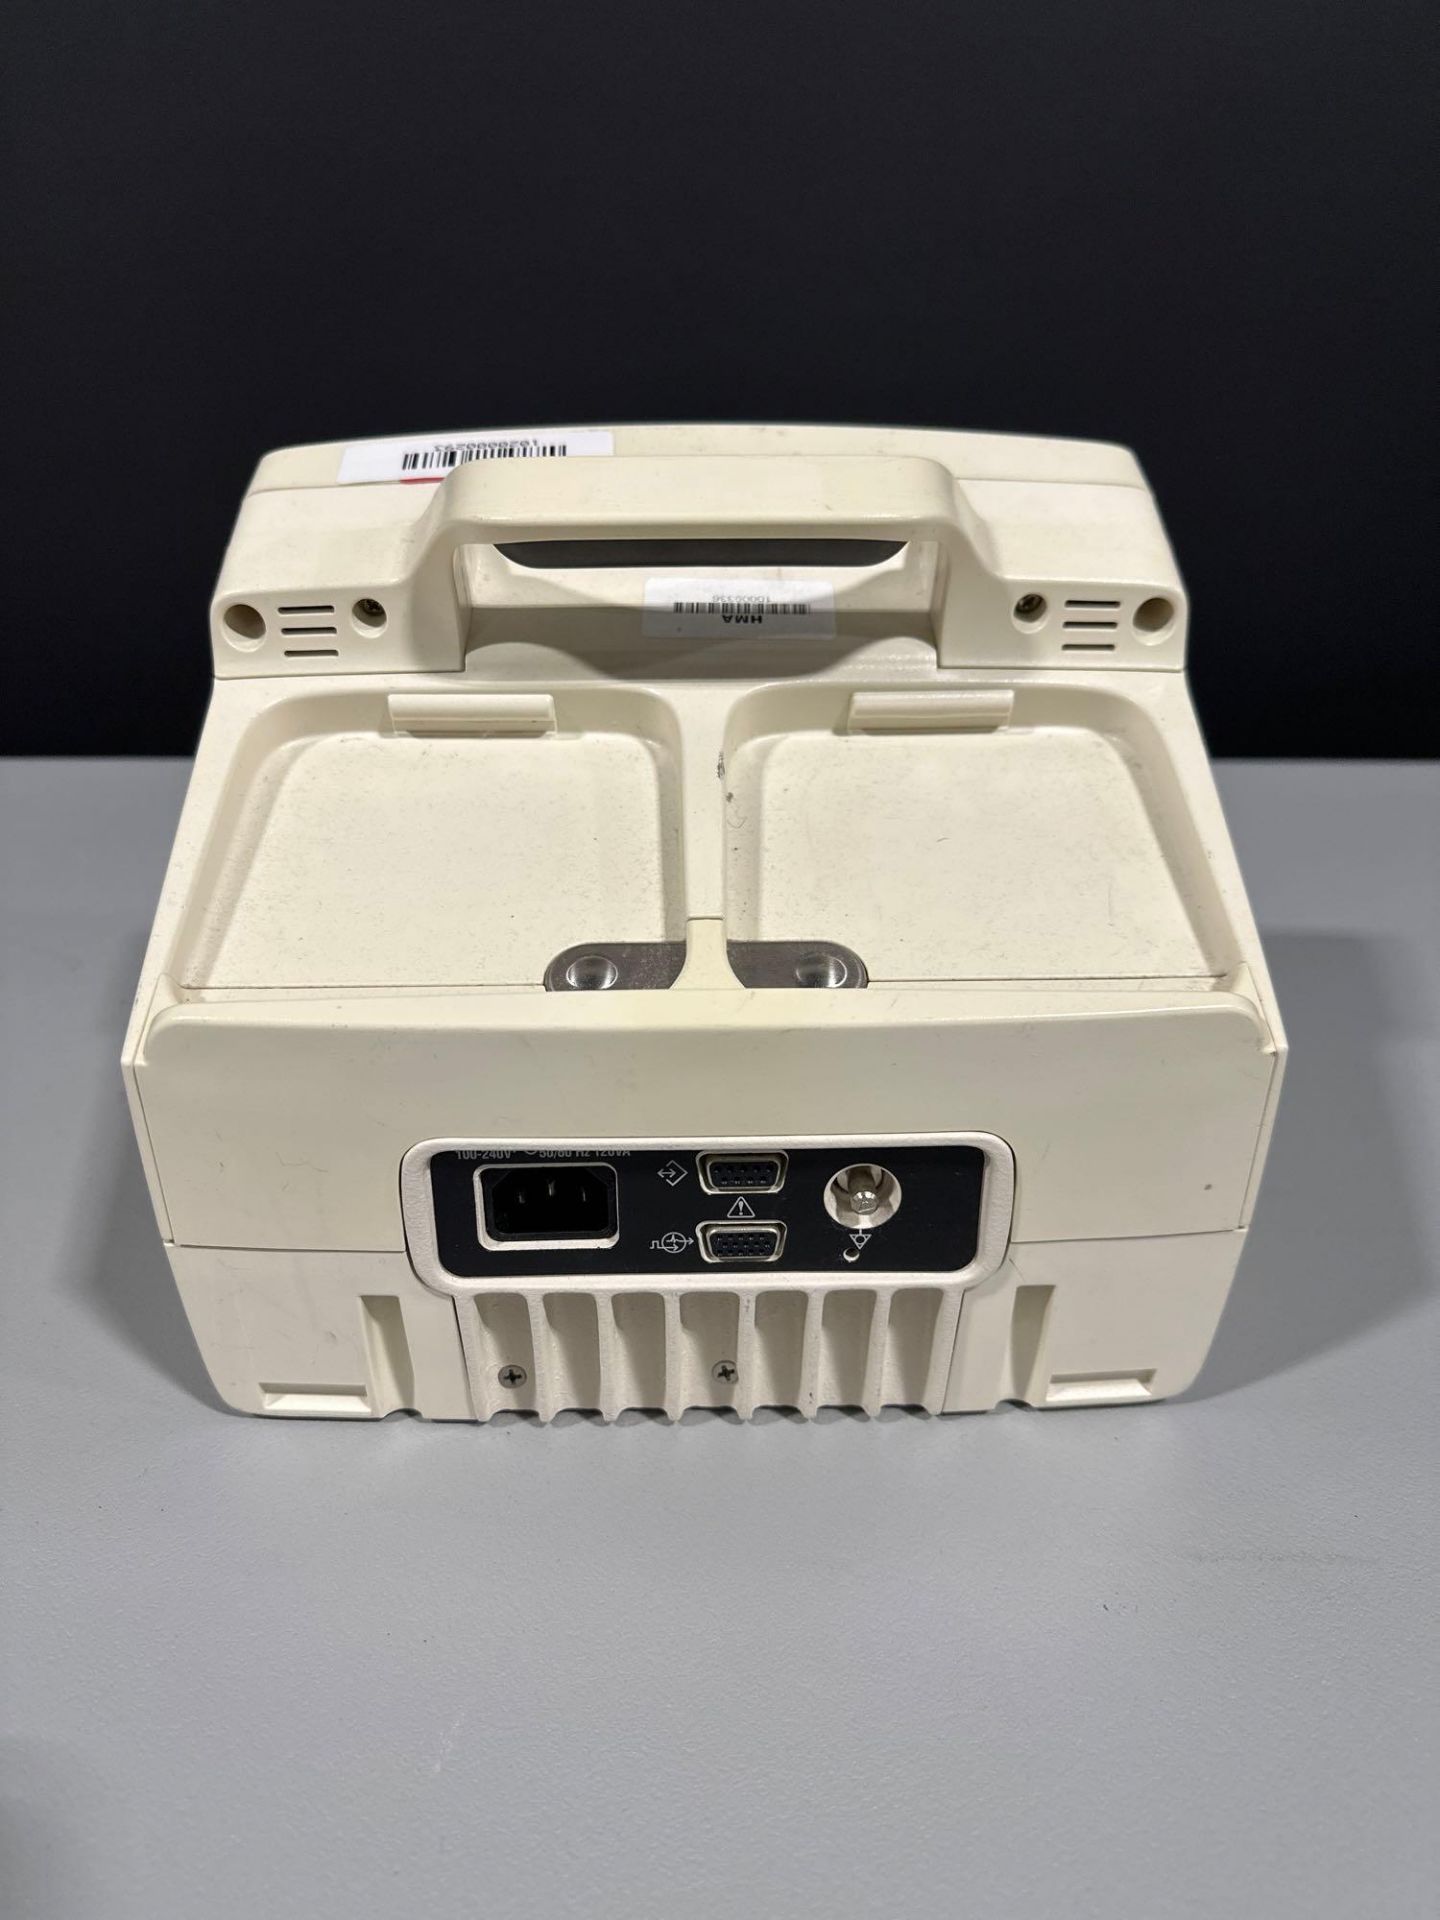 MEDTRONIC/PHYSIO CONTROL LIFEPAK 20 DEFIB WITH PACING, 3 LEAD ECG, ANALYZE (AED MODE) - Image 7 of 8